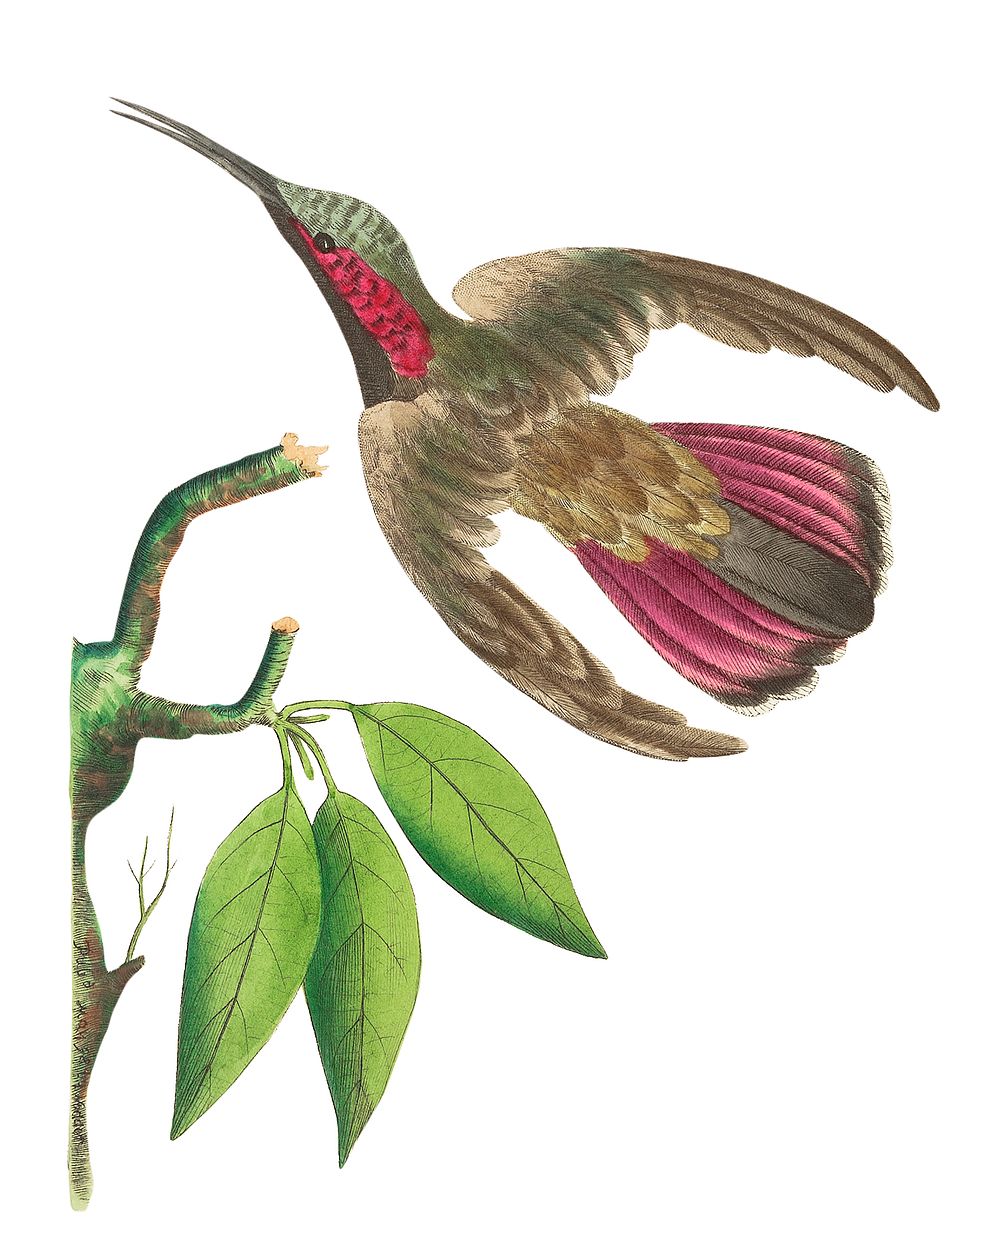 Purple-tailed Hummingbird illustration from The Naturalist's Miscellany (1789-1813) by George Shaw (1751-1813)